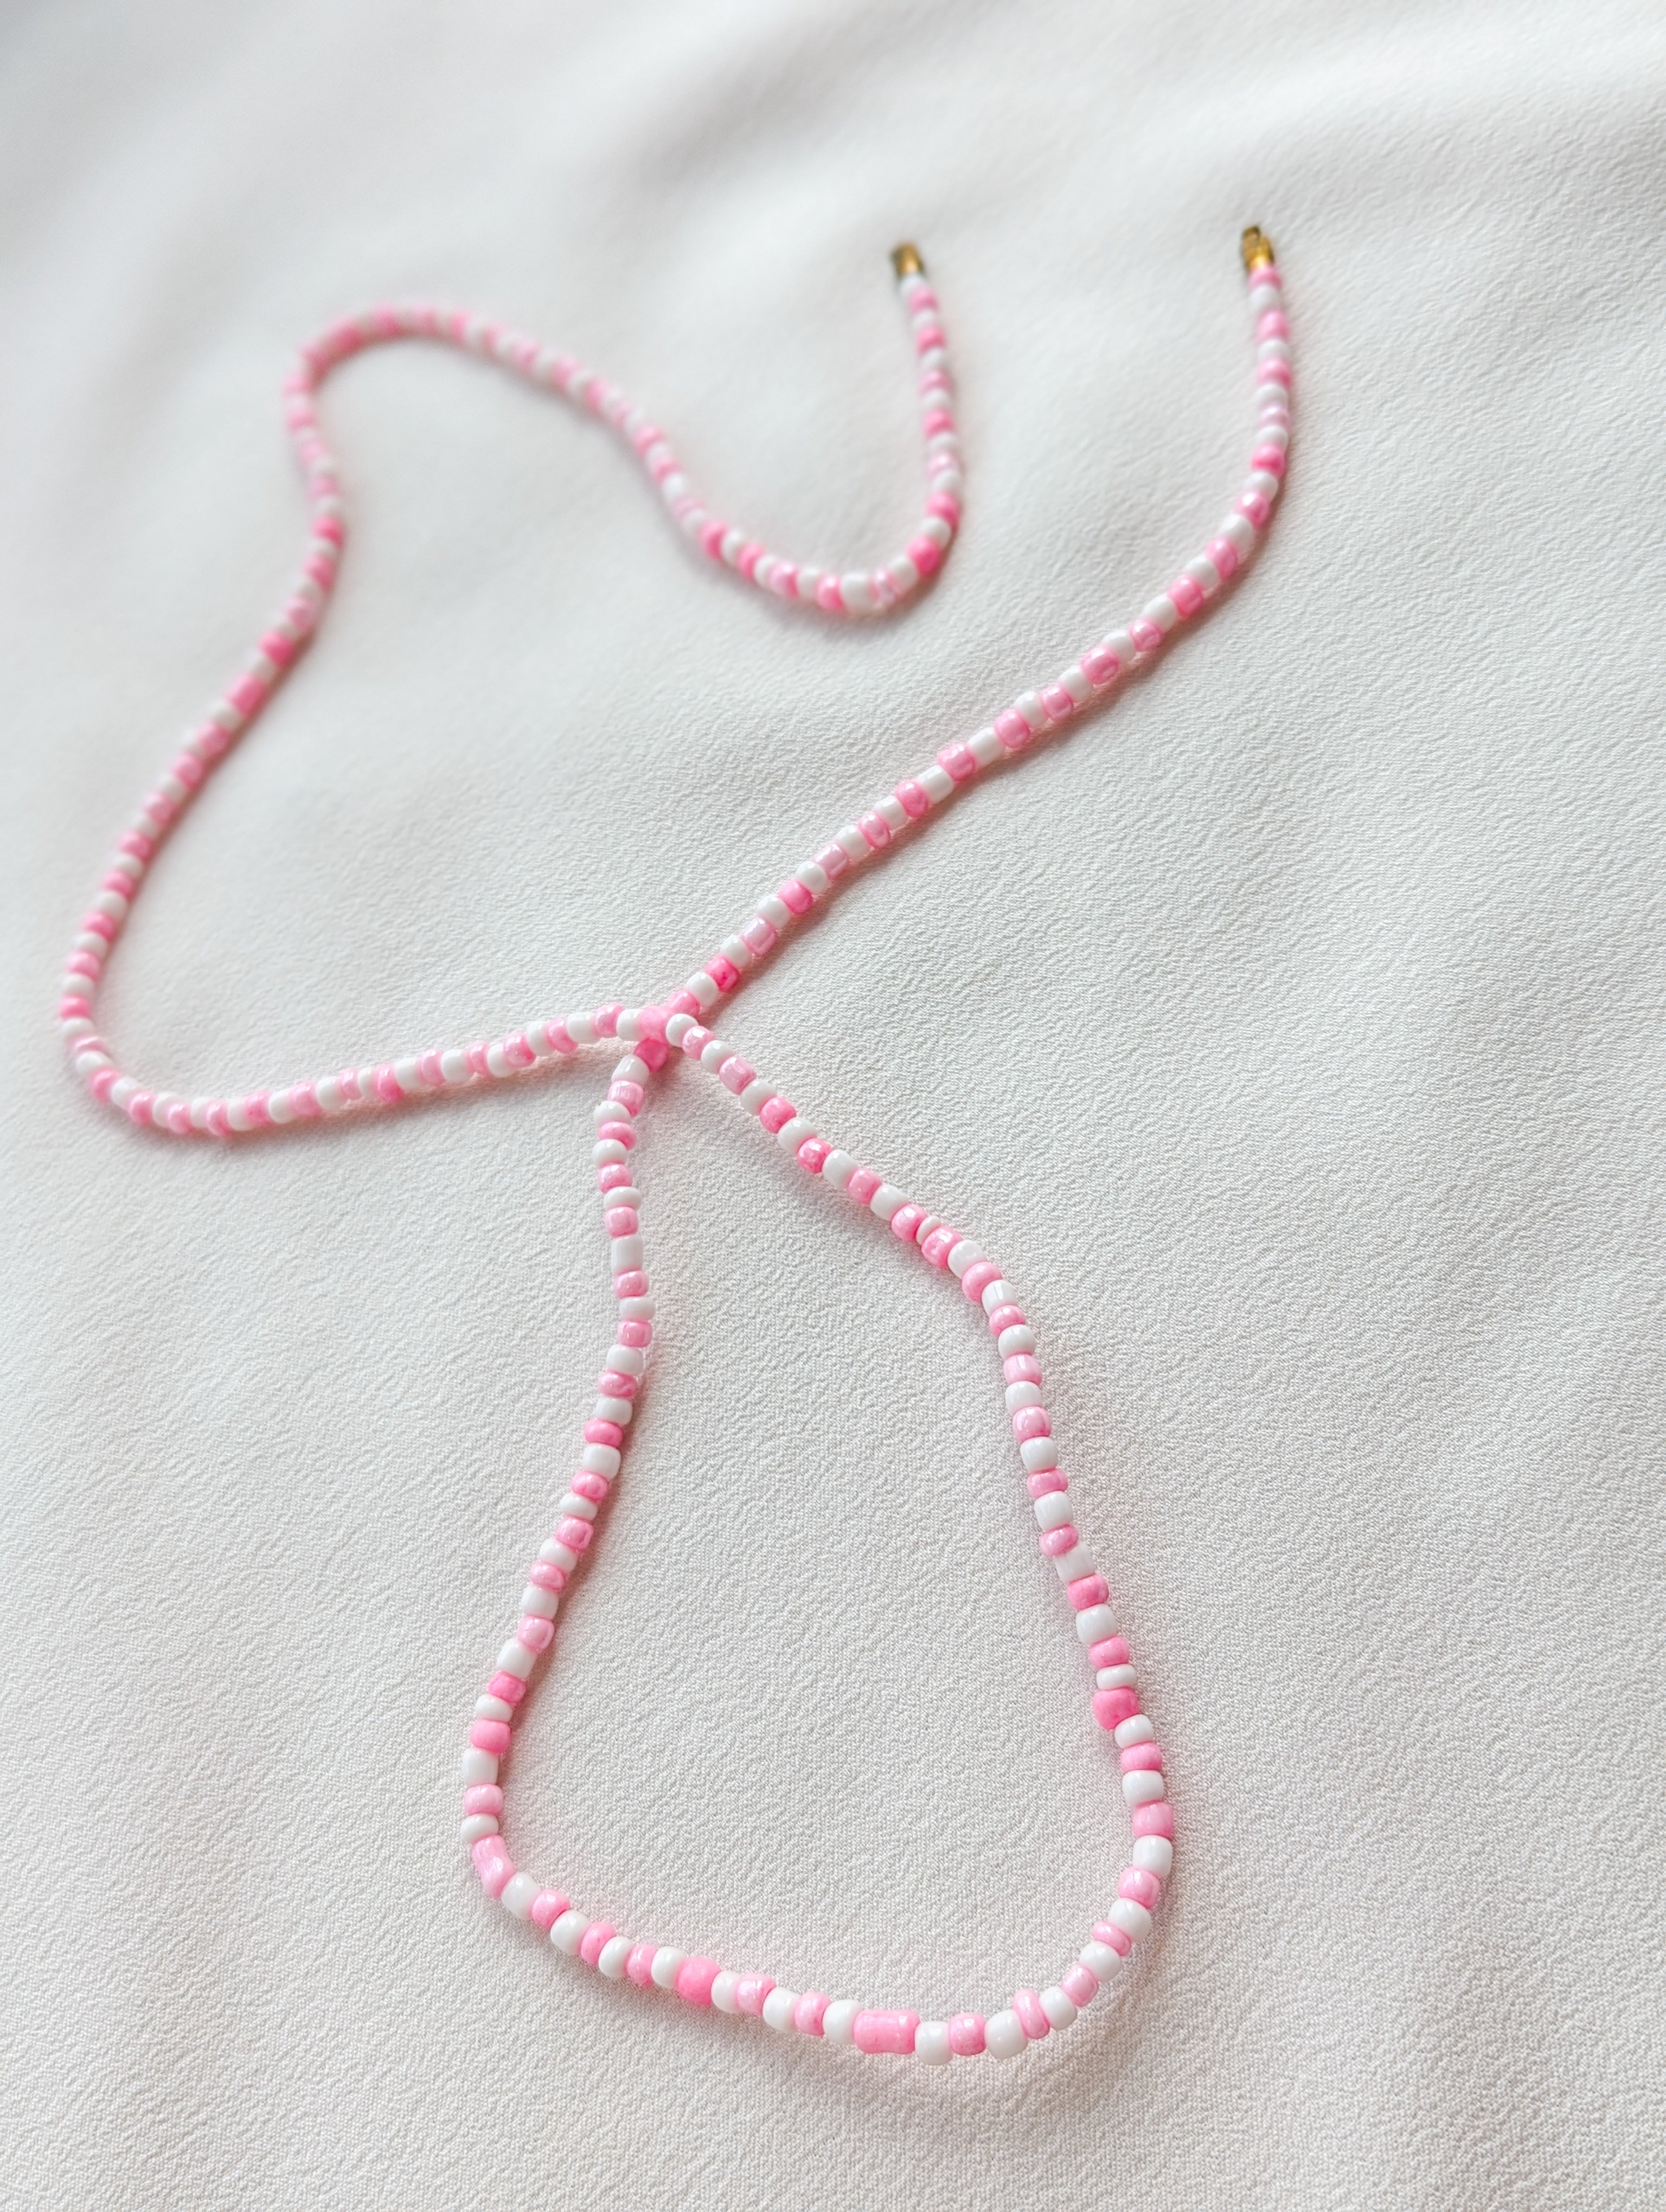 [THE TWO] Belly Chain: White/Pink [Large Beads]